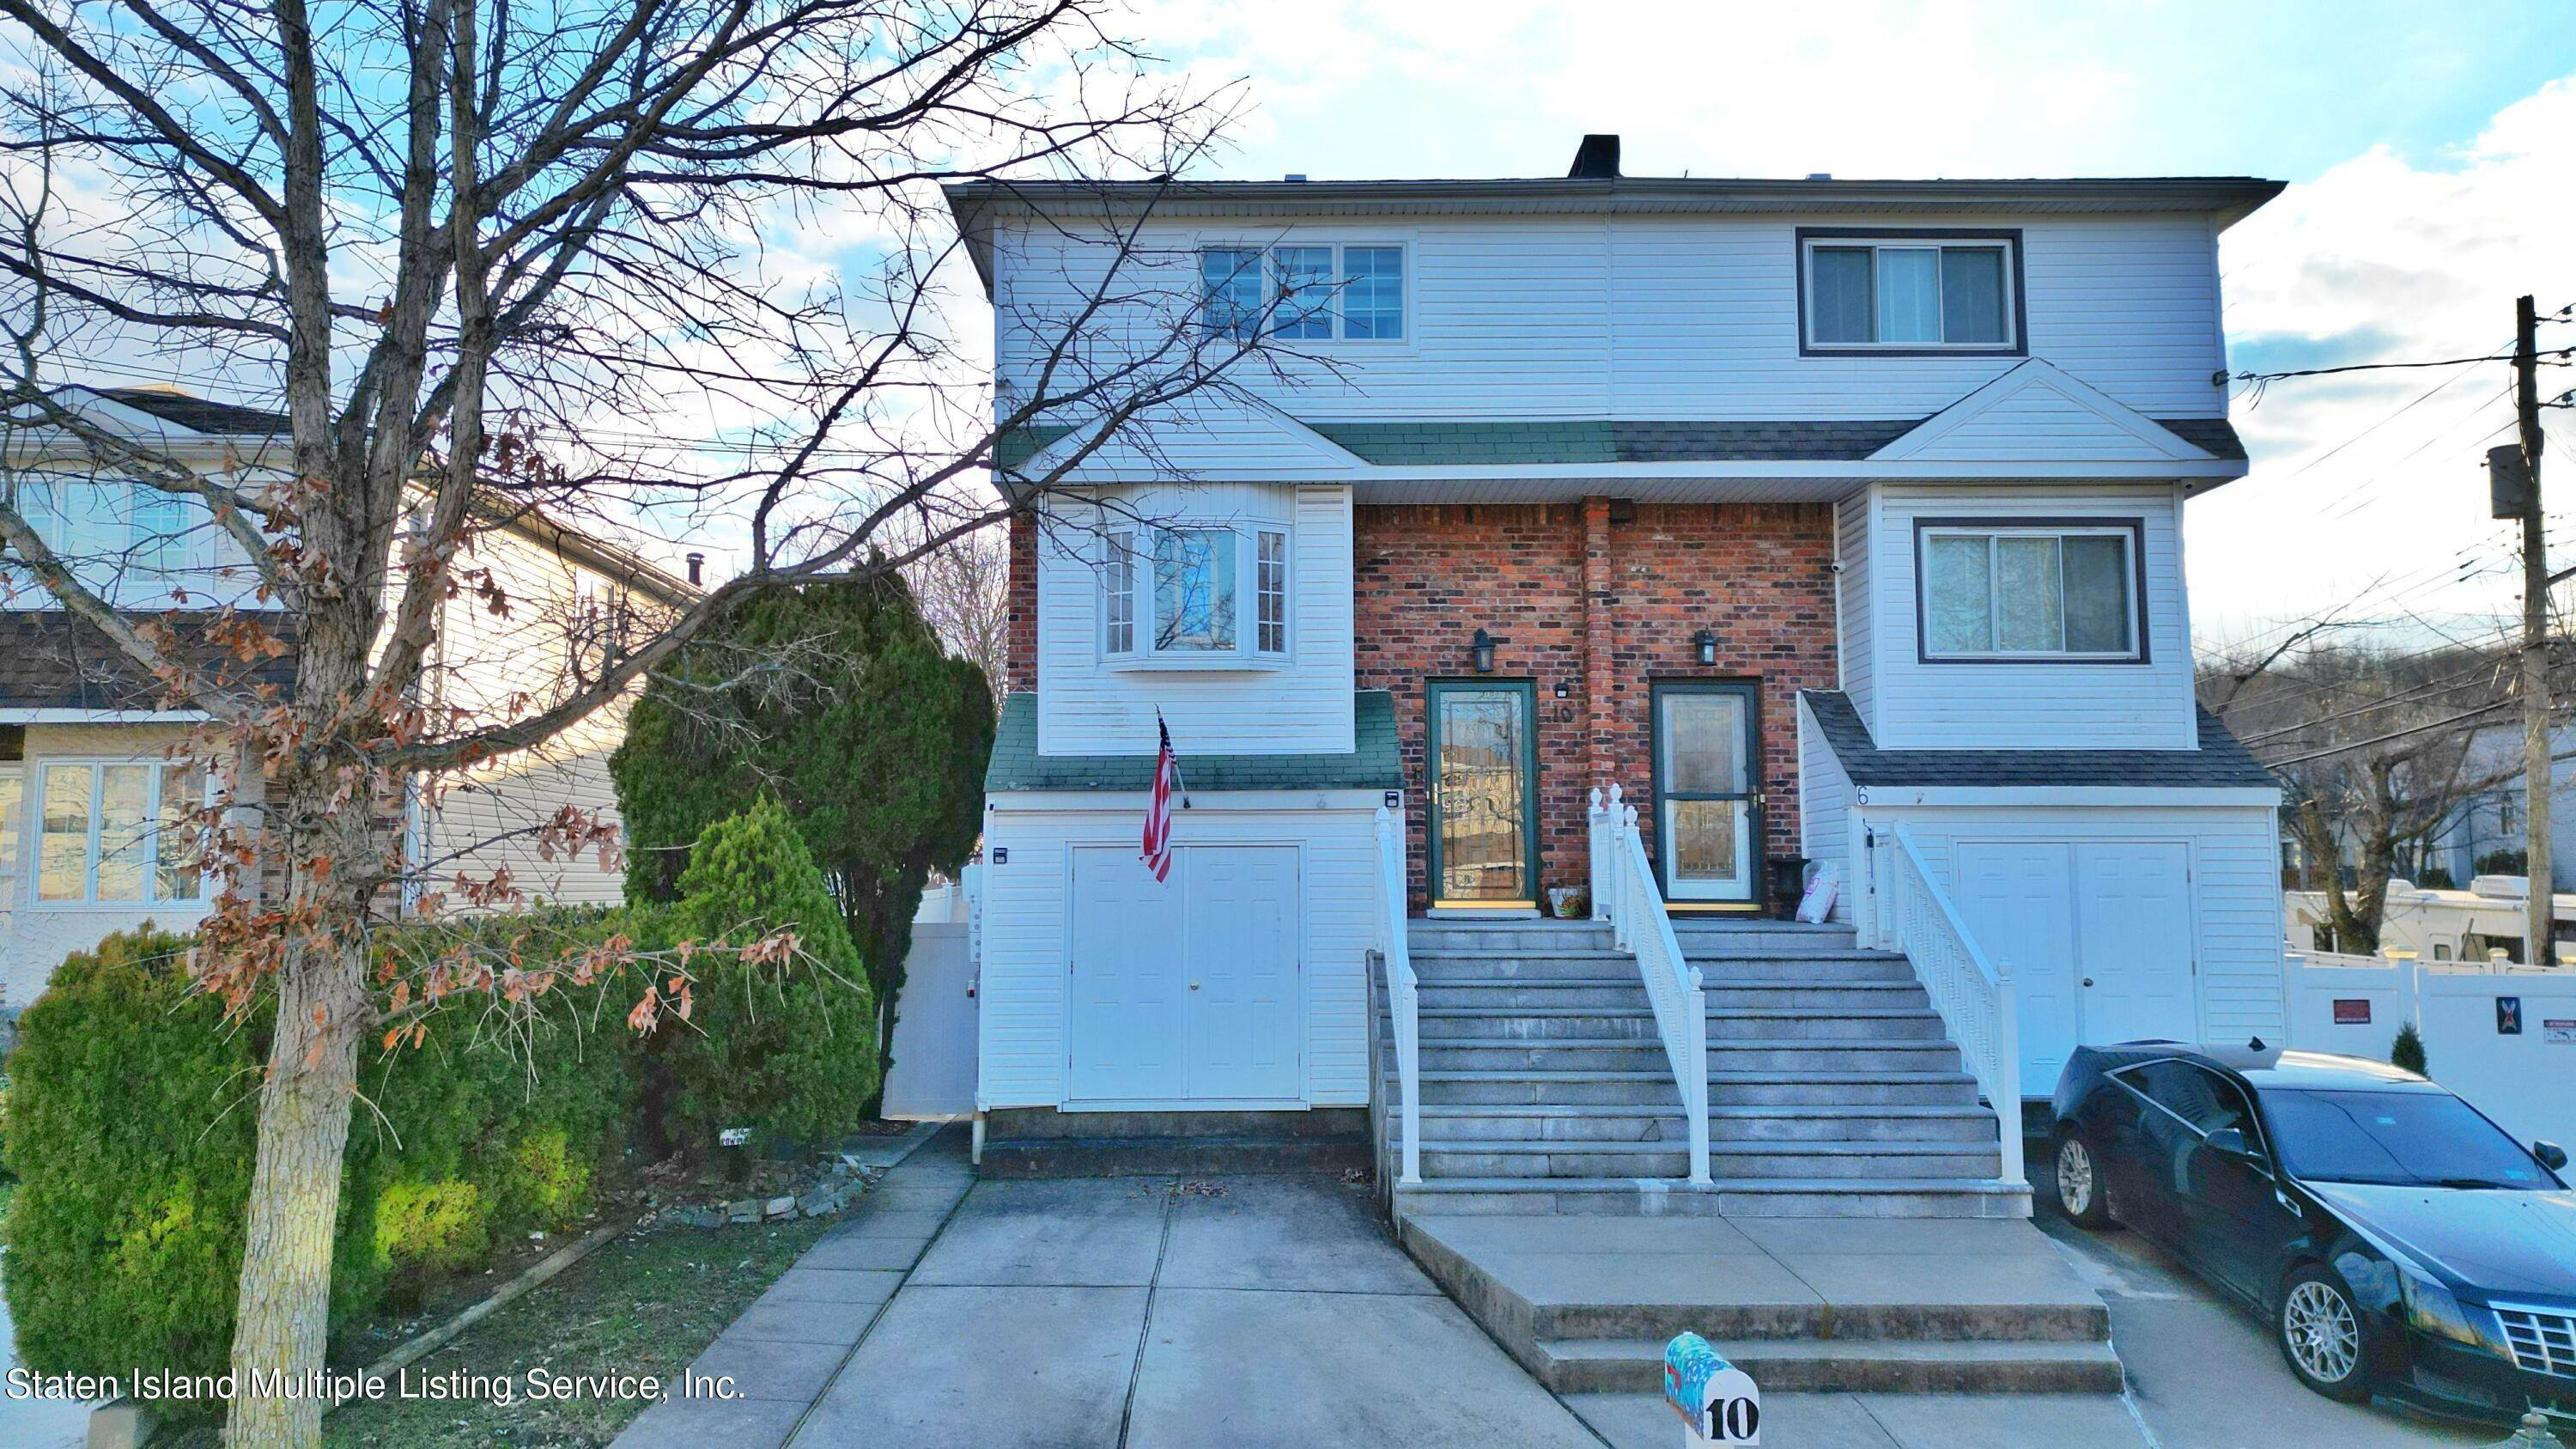 Single Family for Sale at Annadale, Staten Island, NY 10312